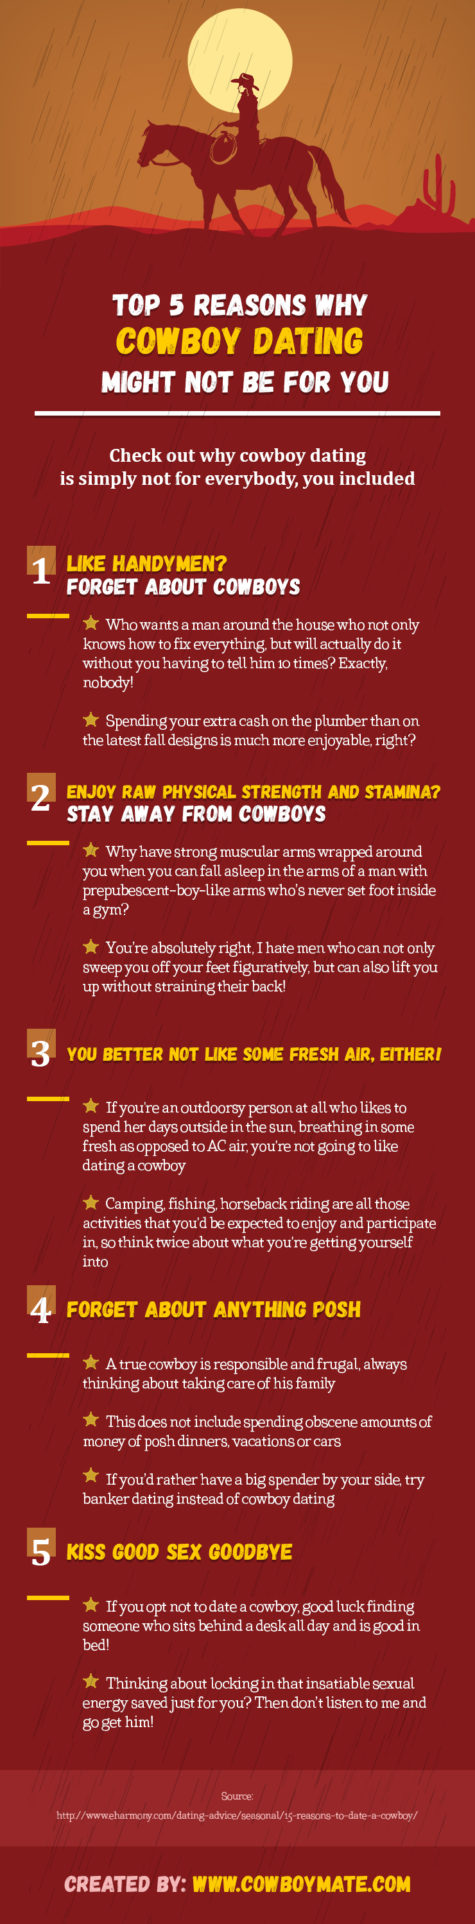 Top 5 Reasons Why Cowboy Dating Might NOT Be For You